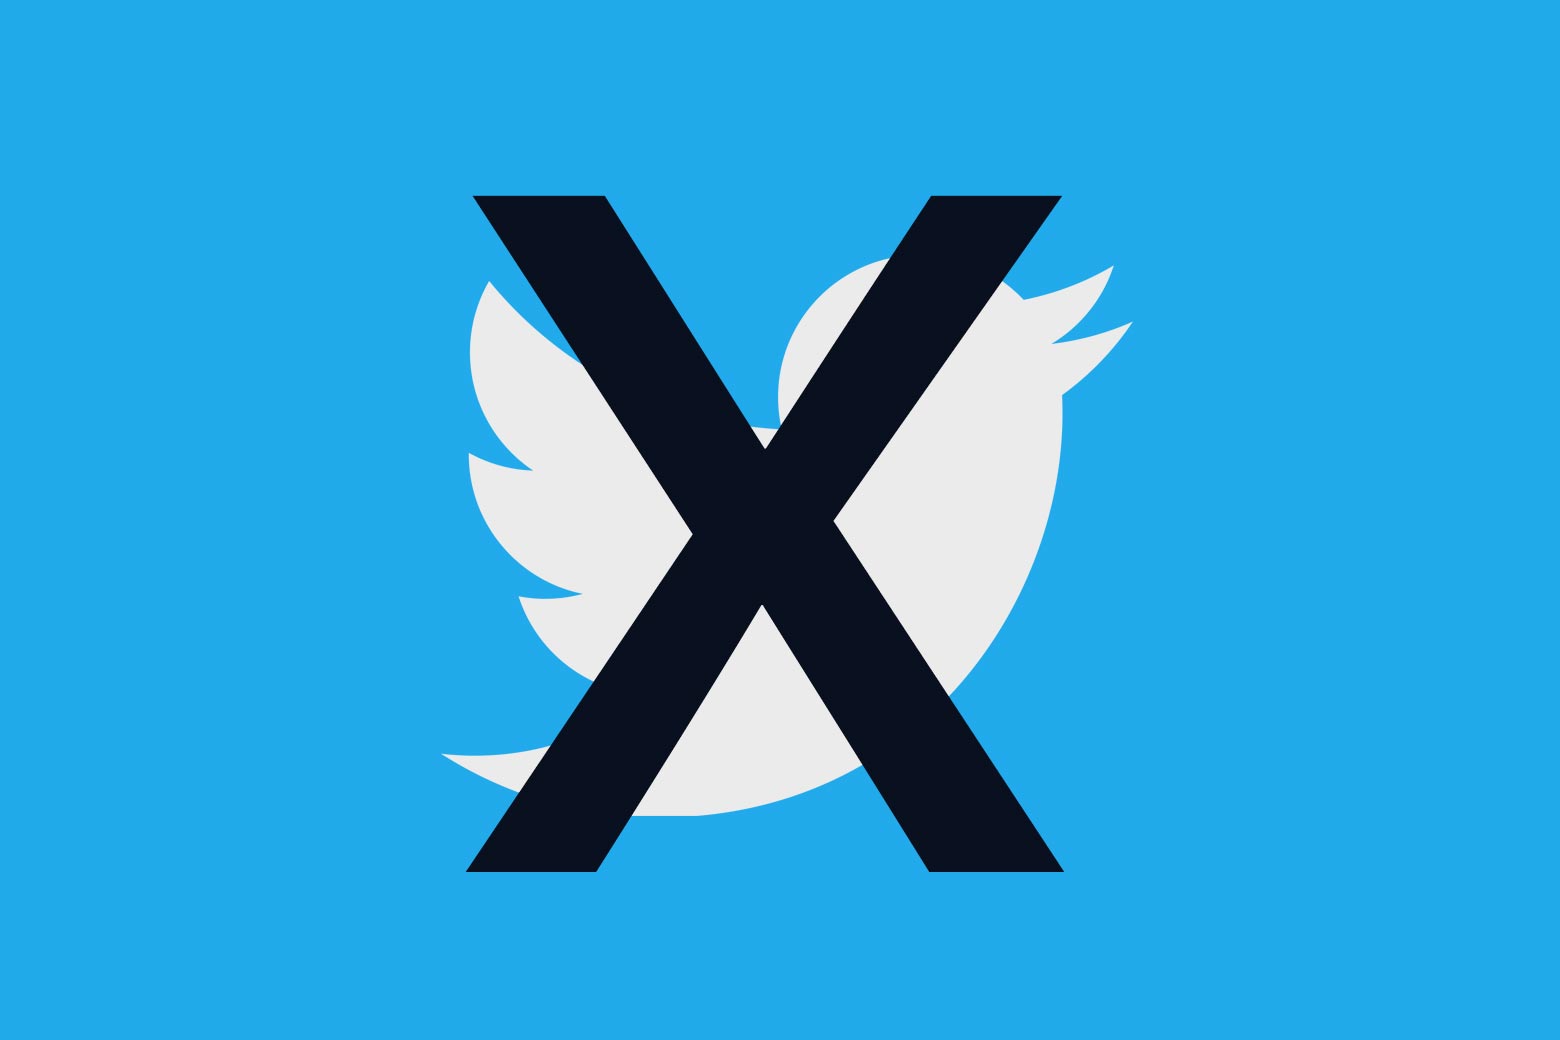 The Twitter bird is obscured by a giant black X.